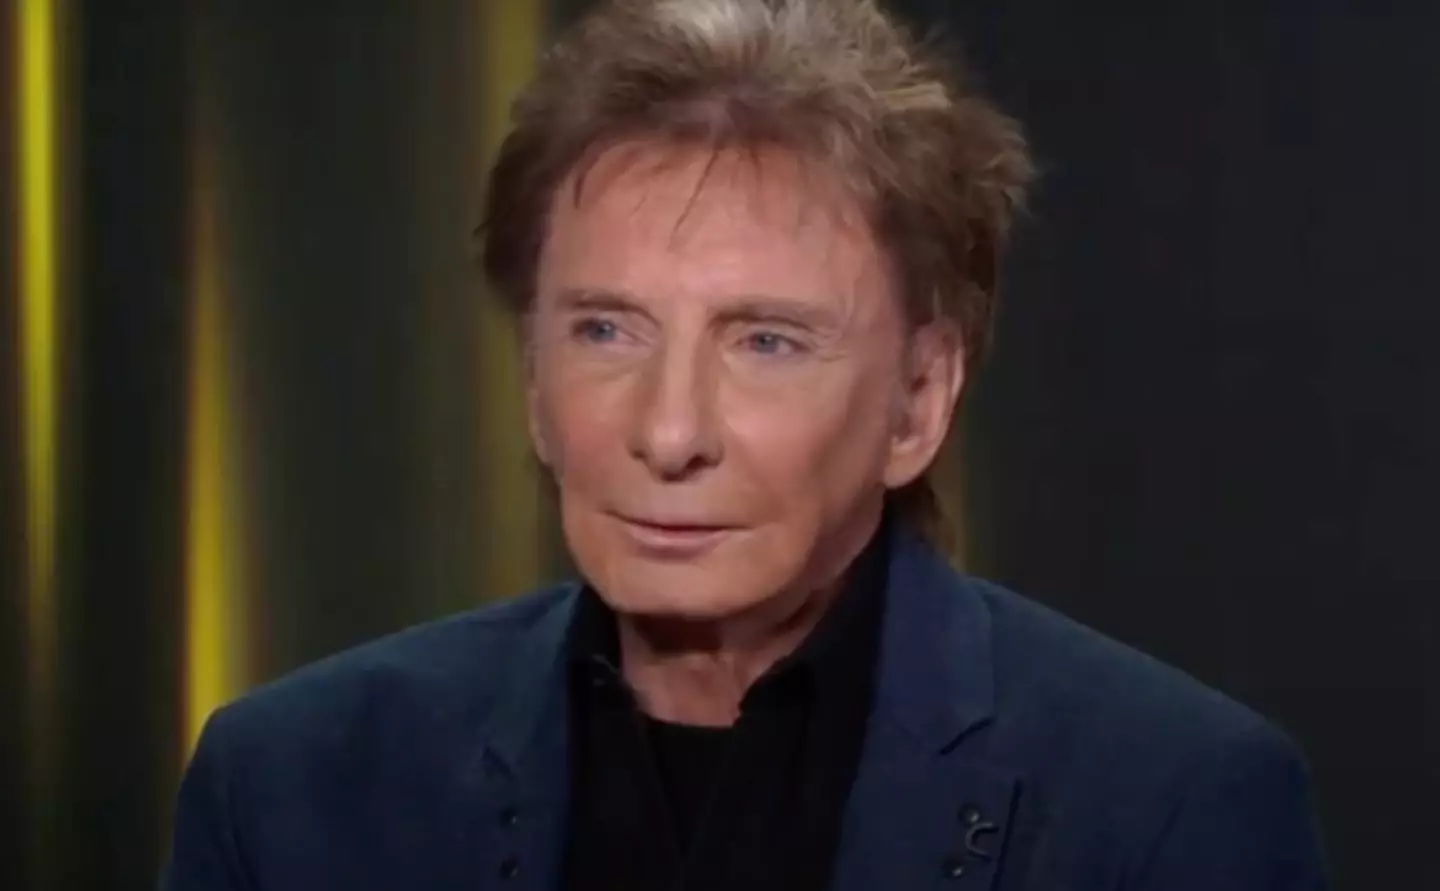 Barry Manilow explained how important his now-husband, Garry Kief, is.